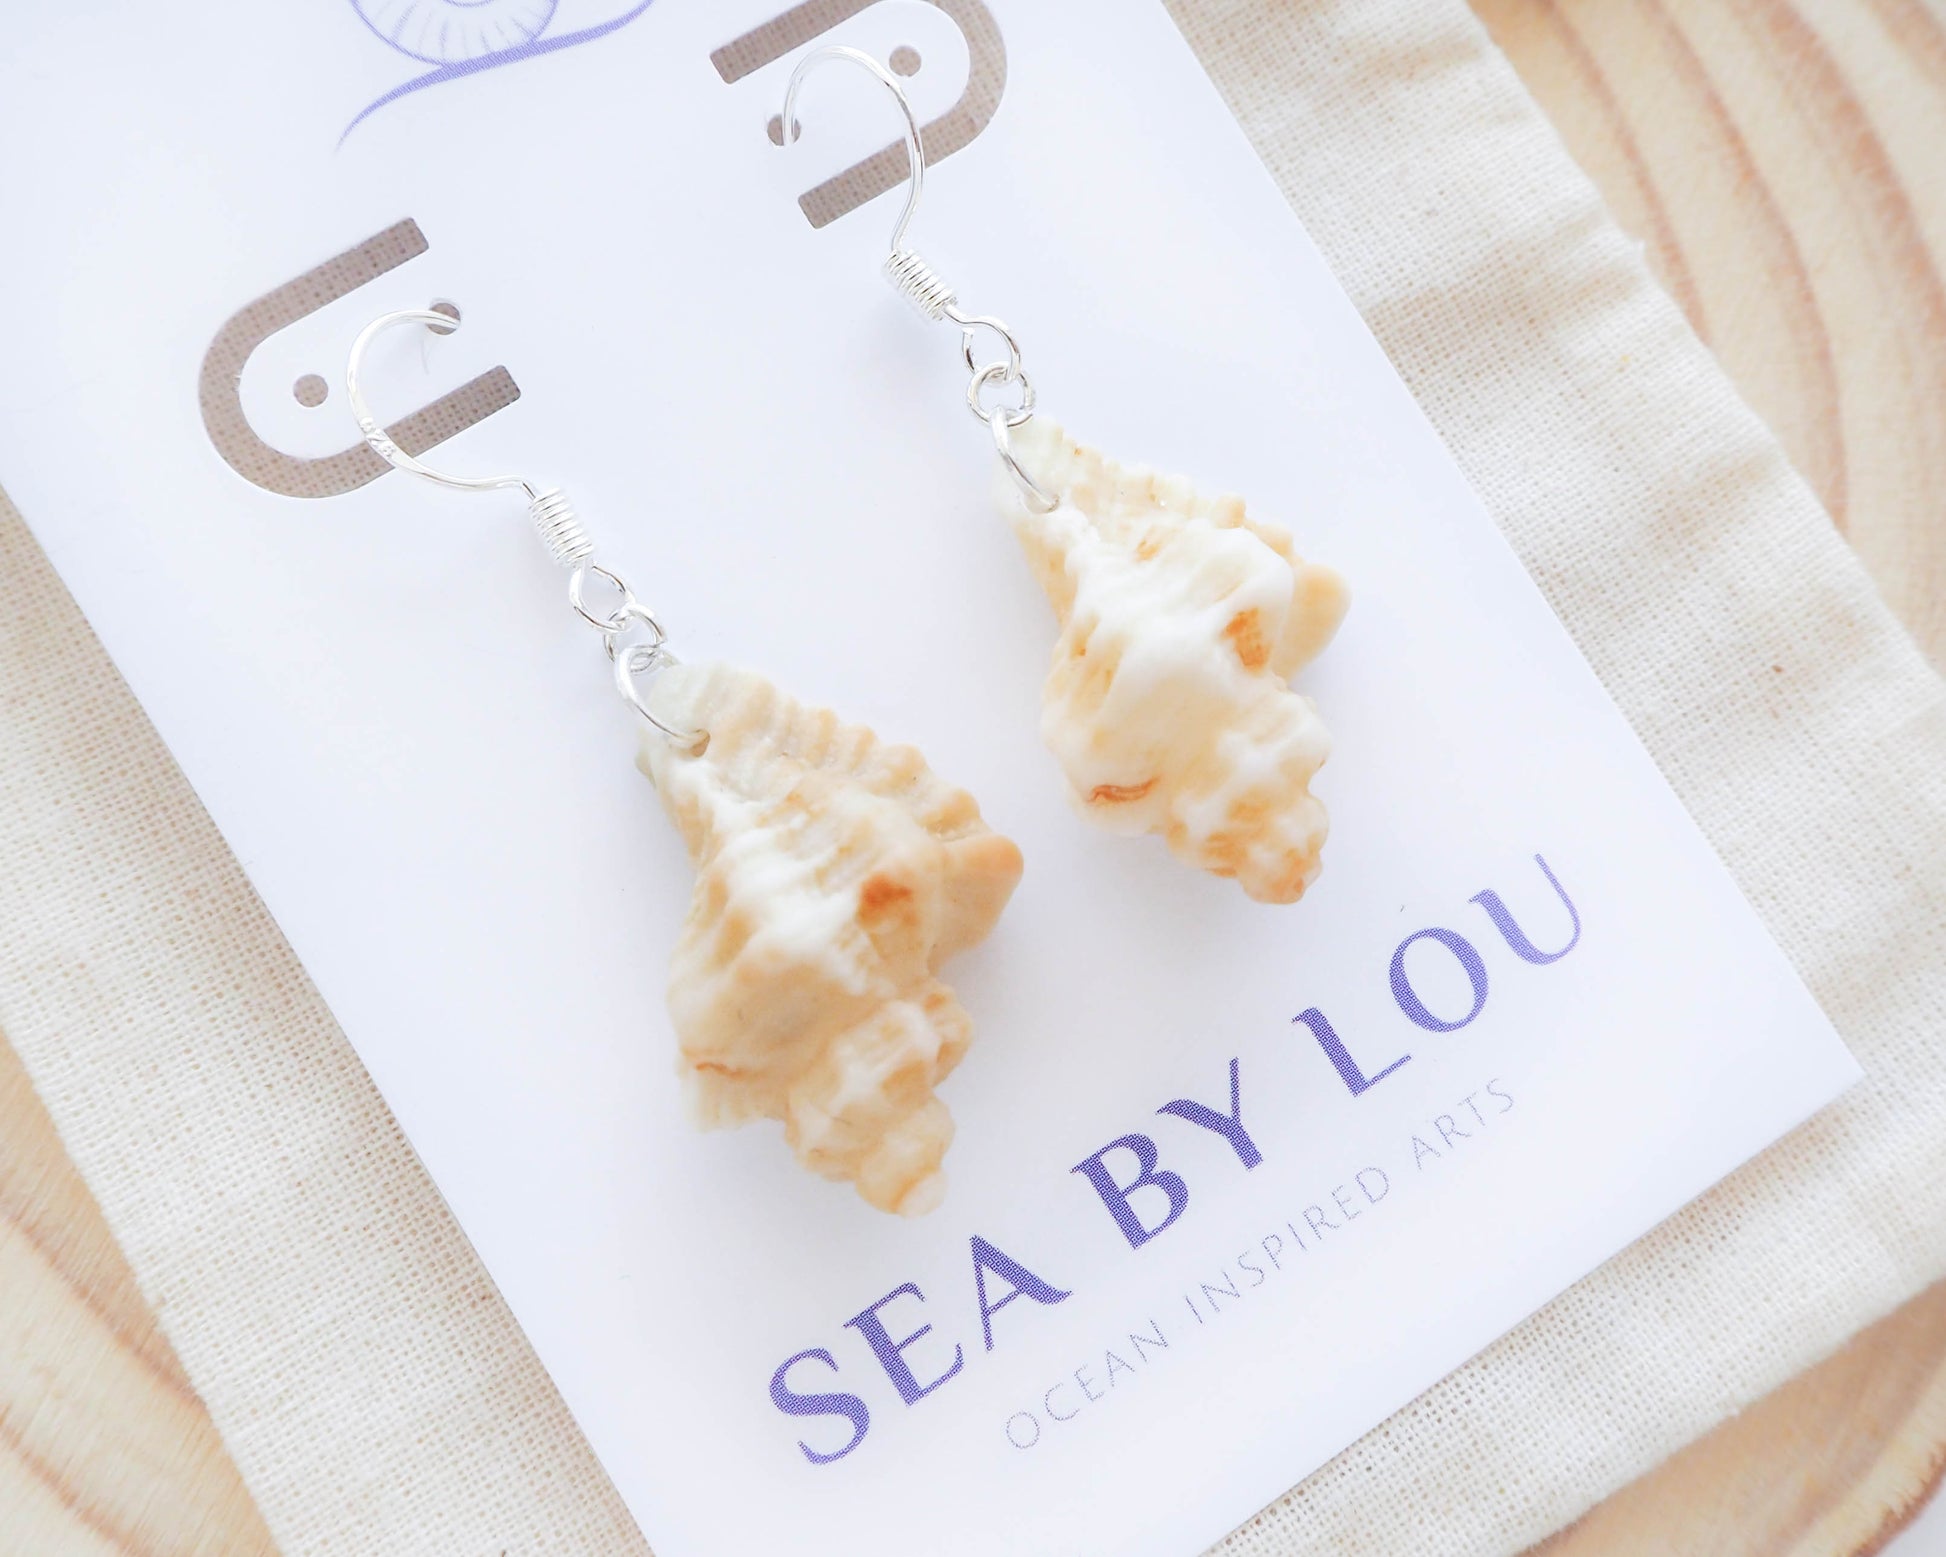 Close-up of Sterling Silver Earrings with European Sting Winkle Shells, Portugal Beach Collection